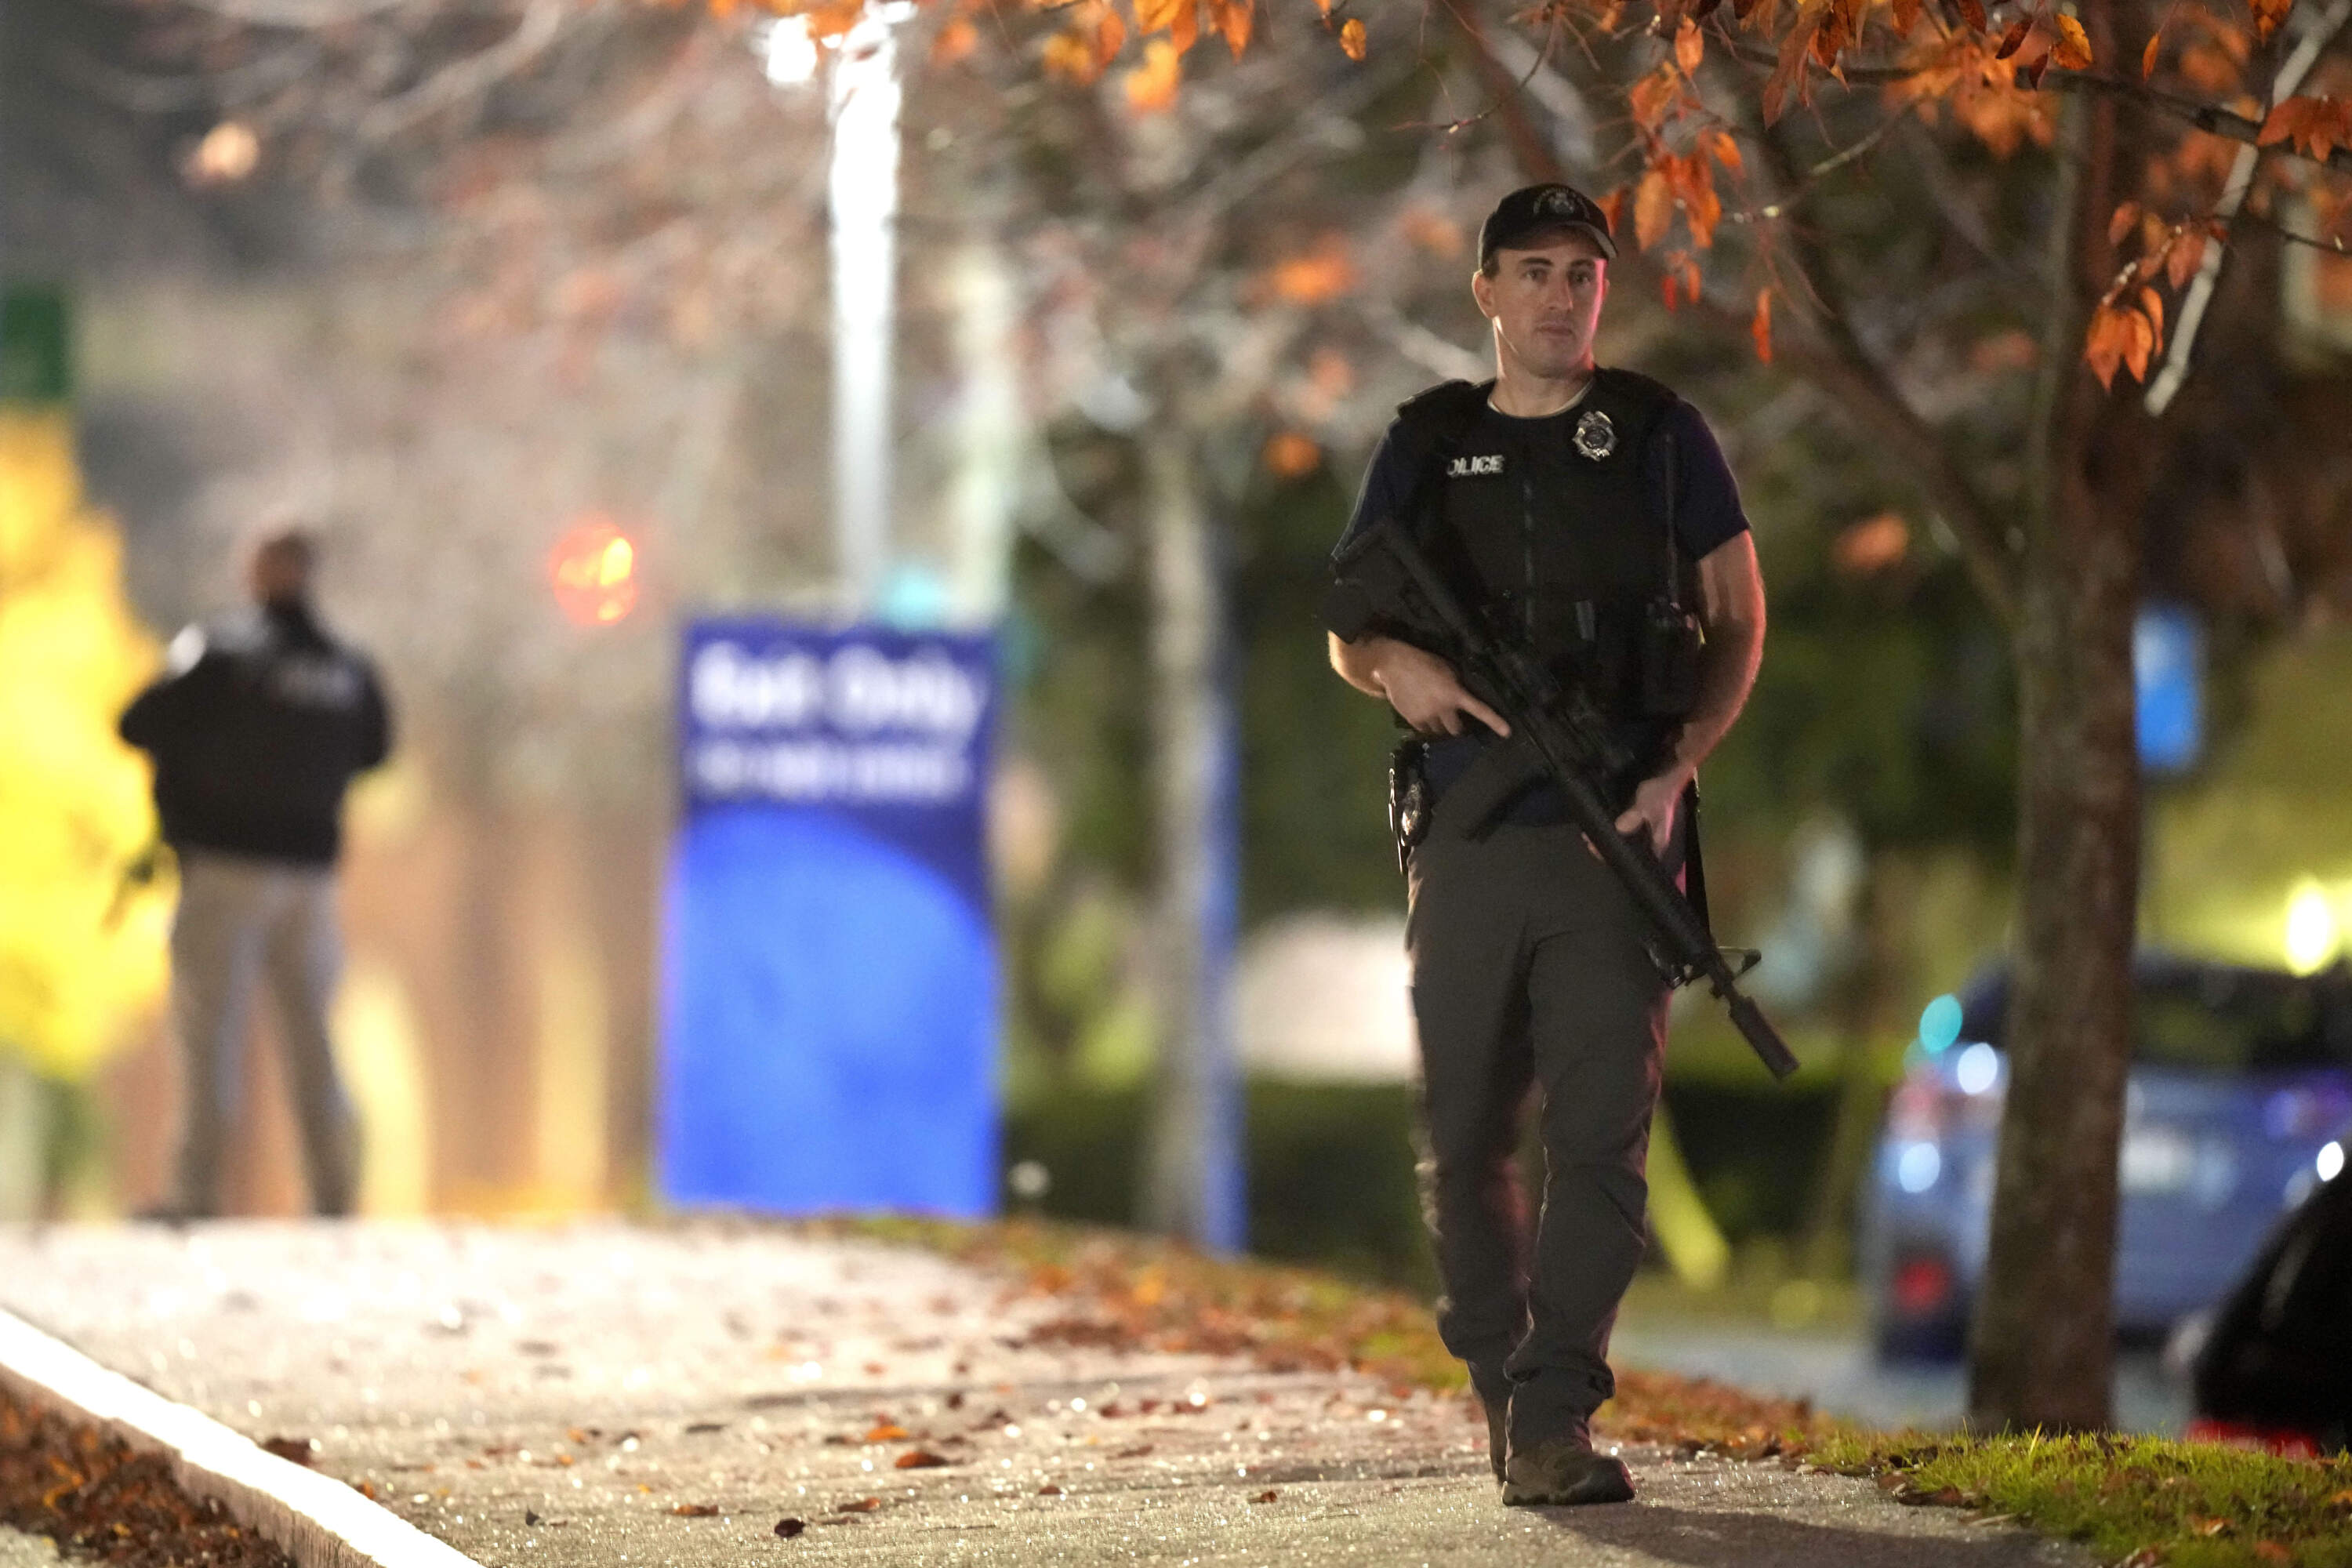 Law enforcement officers carry rifles outside Central Maine Medical Center during an active shooter situation, in Lewiston, Maine, Wednesday, Oct. 25. (Steven Senne/AP)